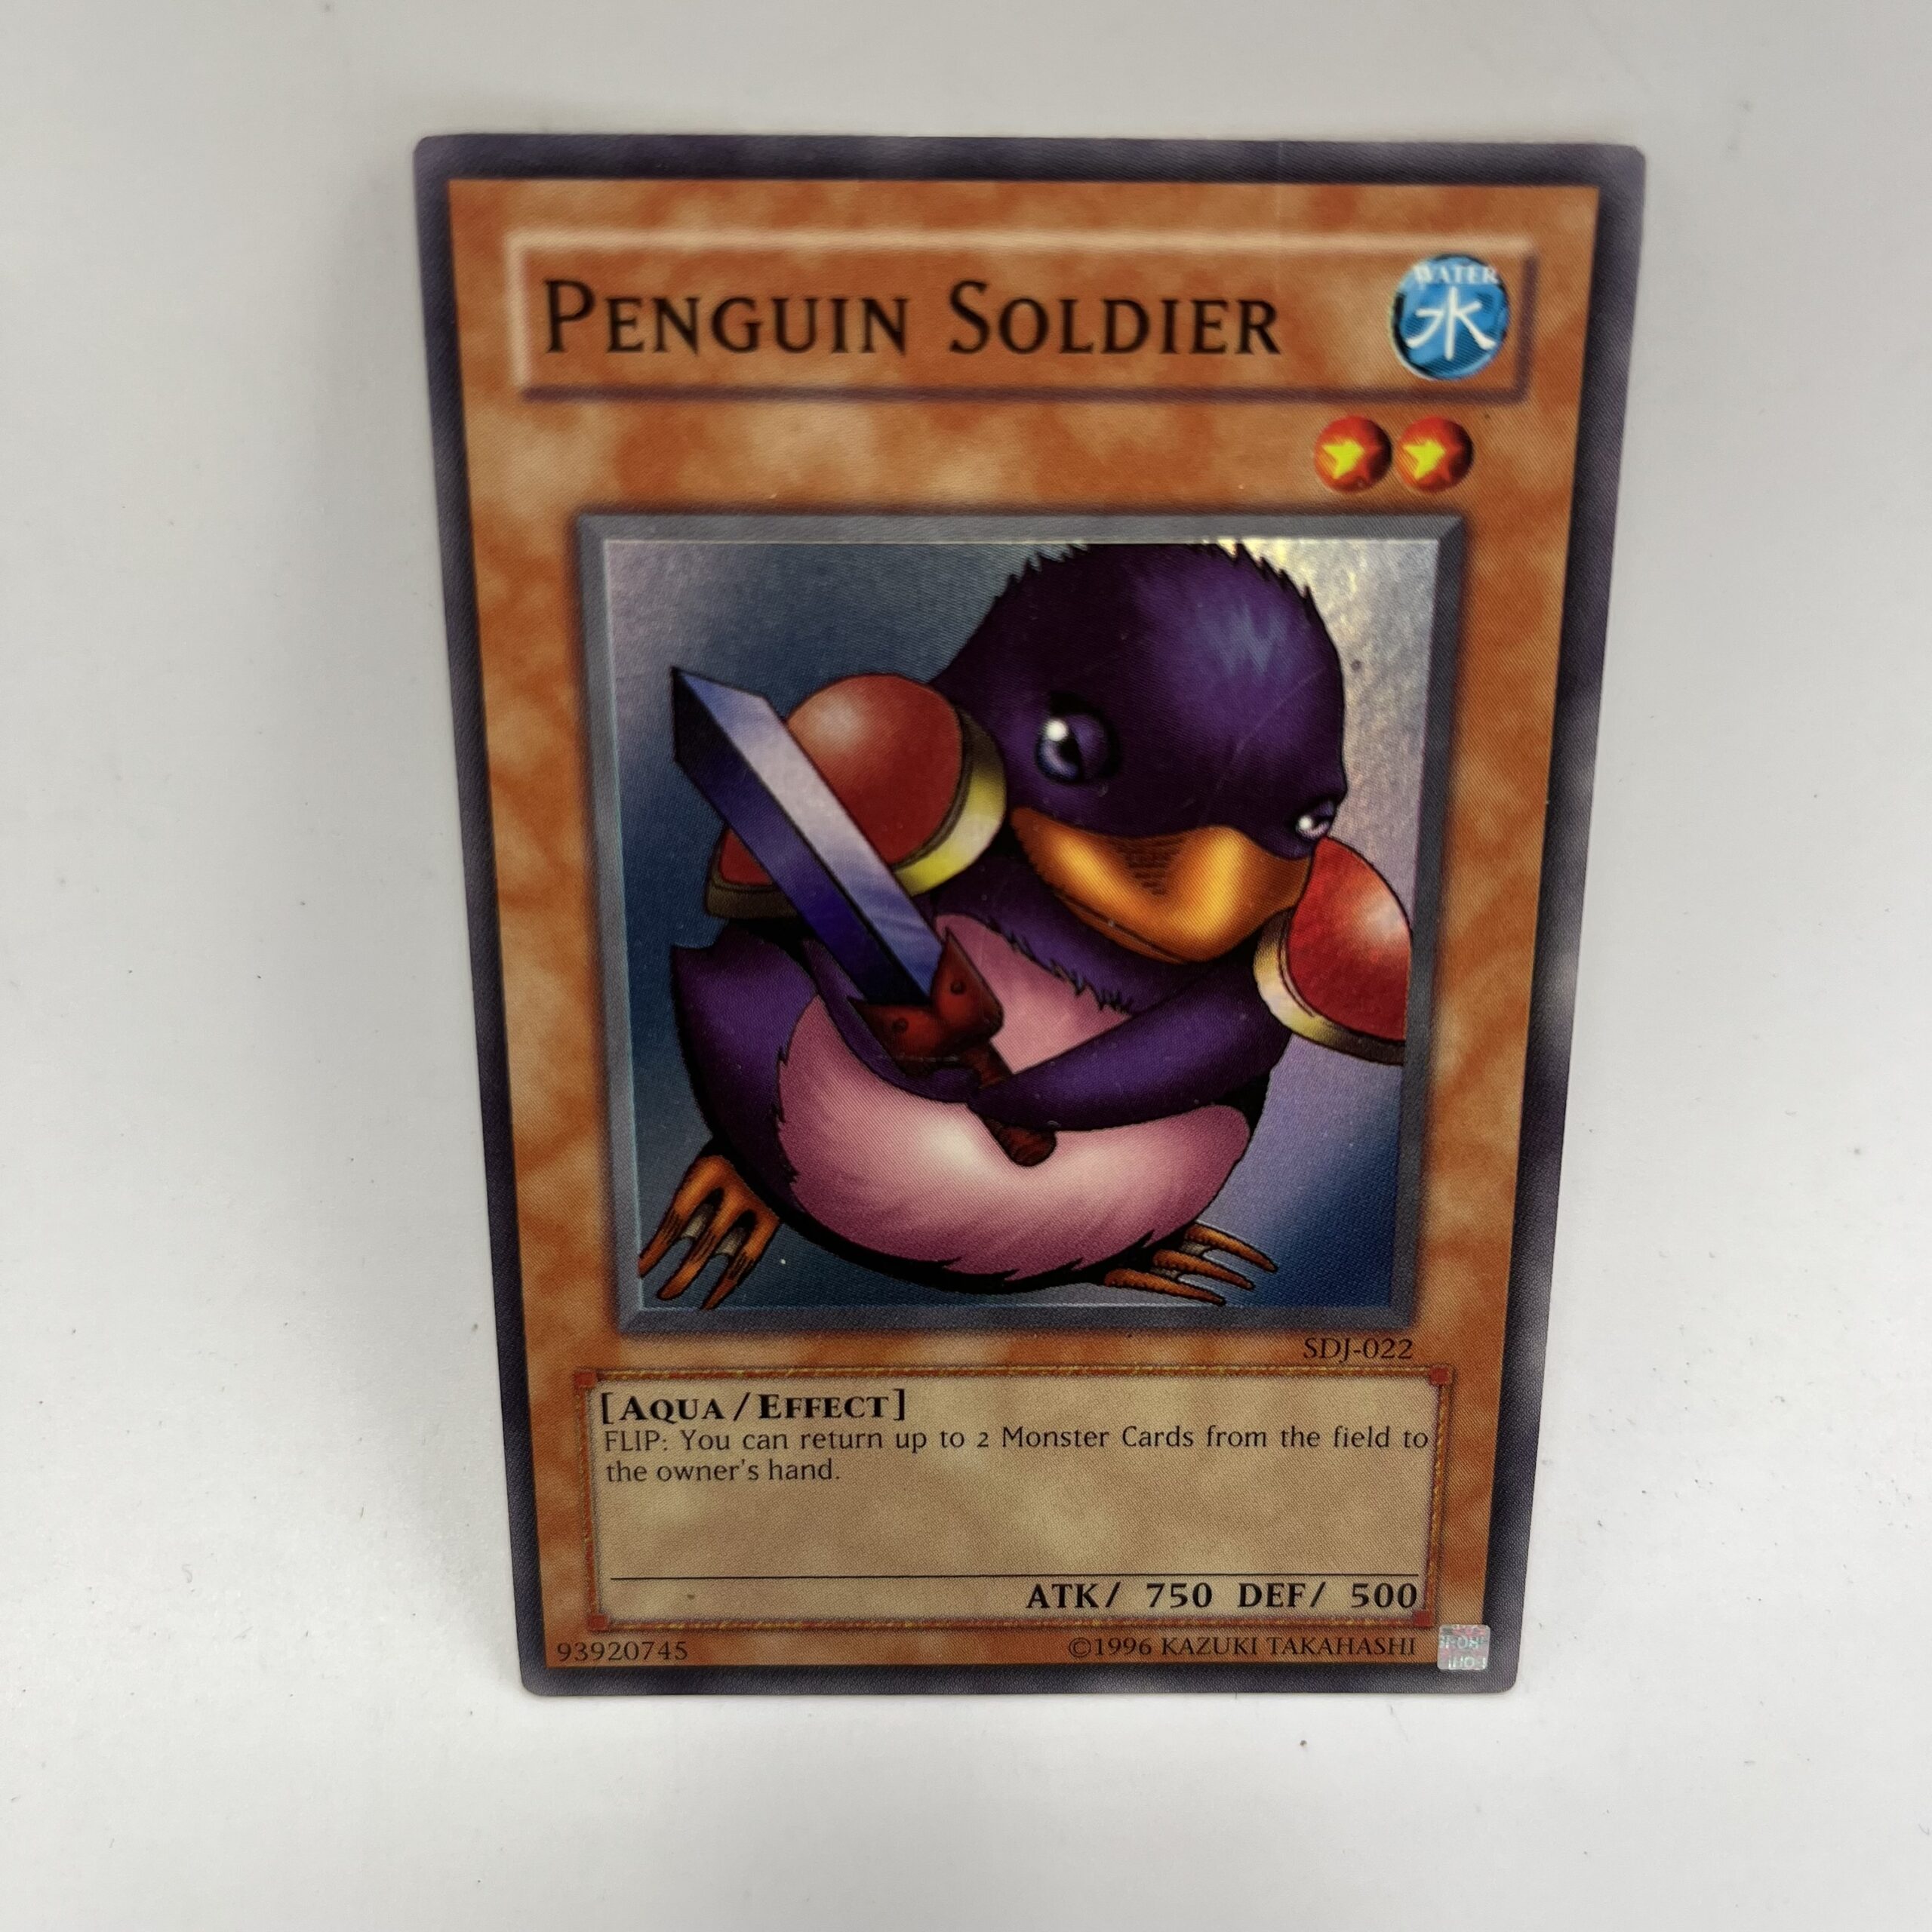 Yu-Gi-Oh Penguin Soldier LP card